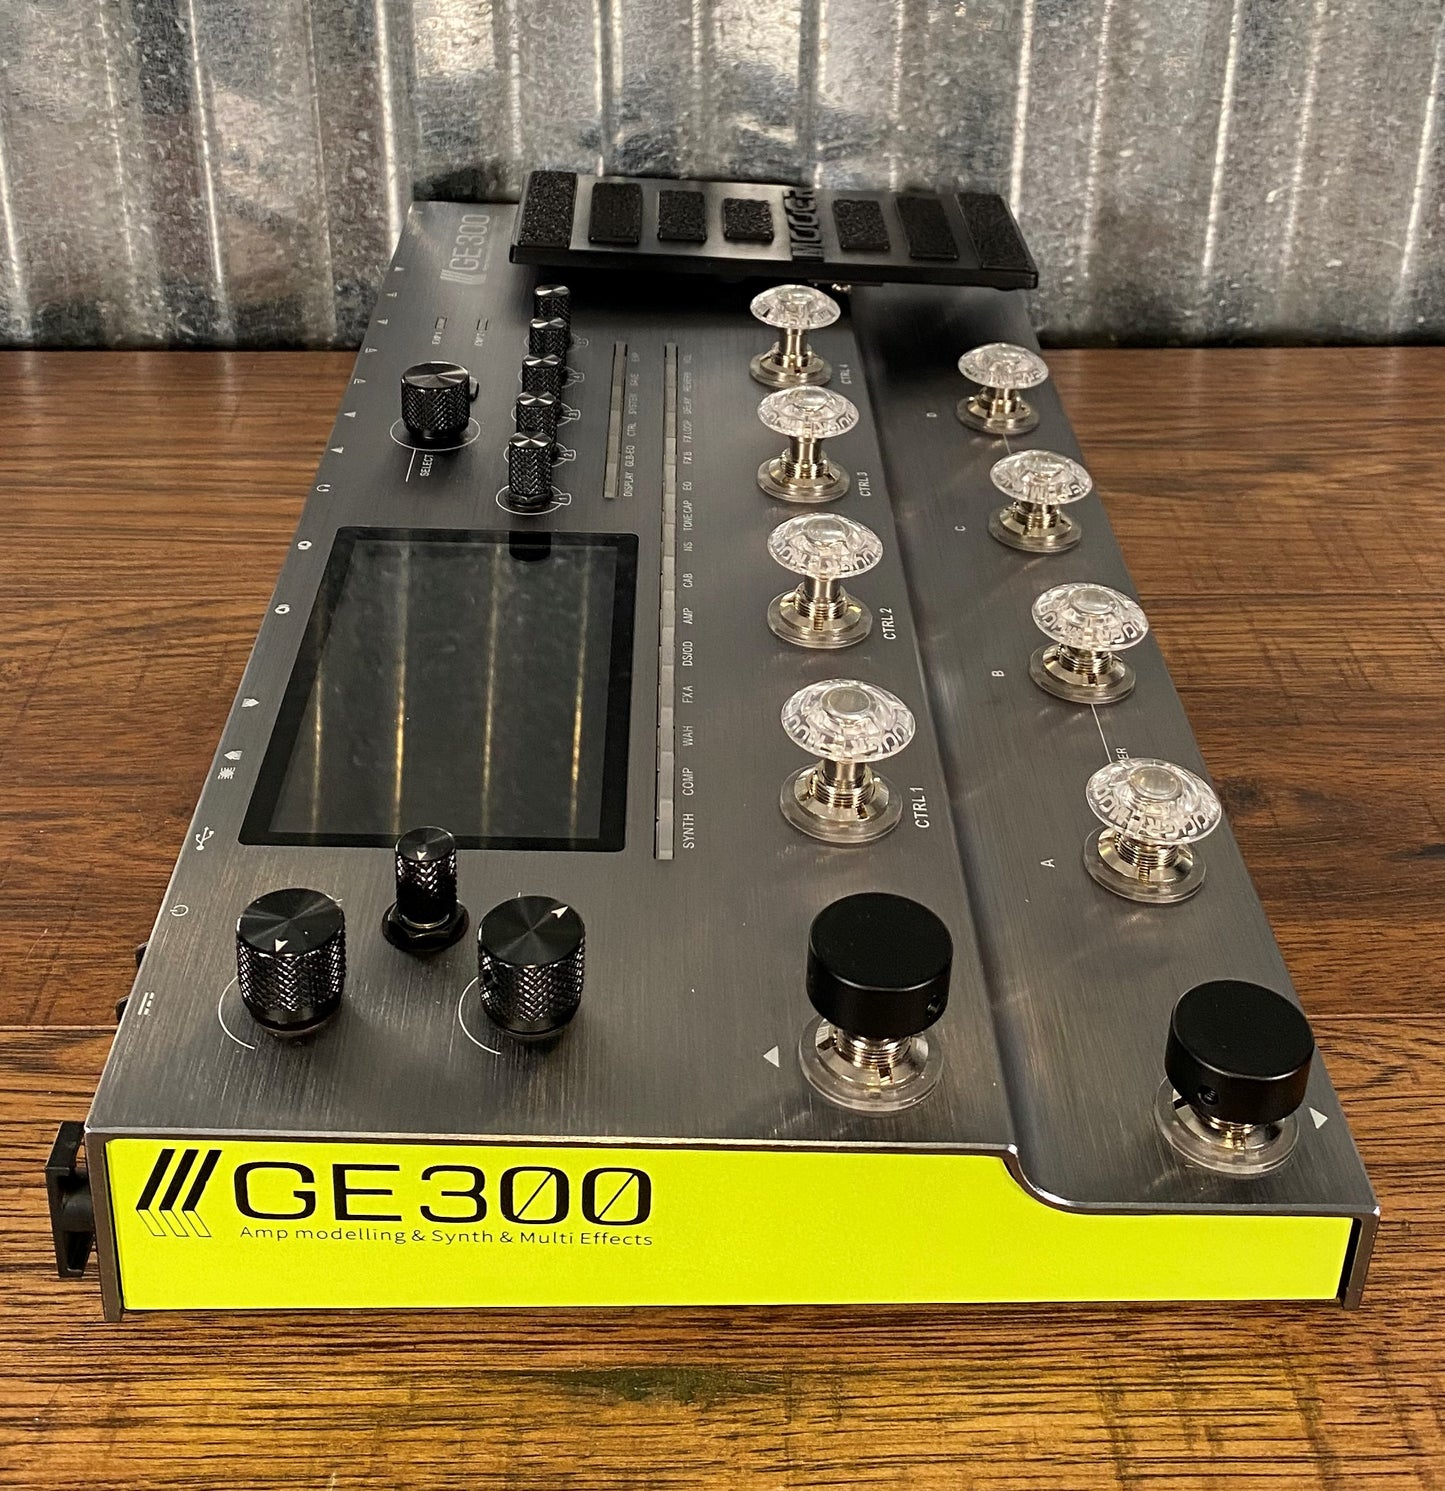 Mooer Audio GE300 Amp Modeling Synth Multi Effect Guitar Pedal Used